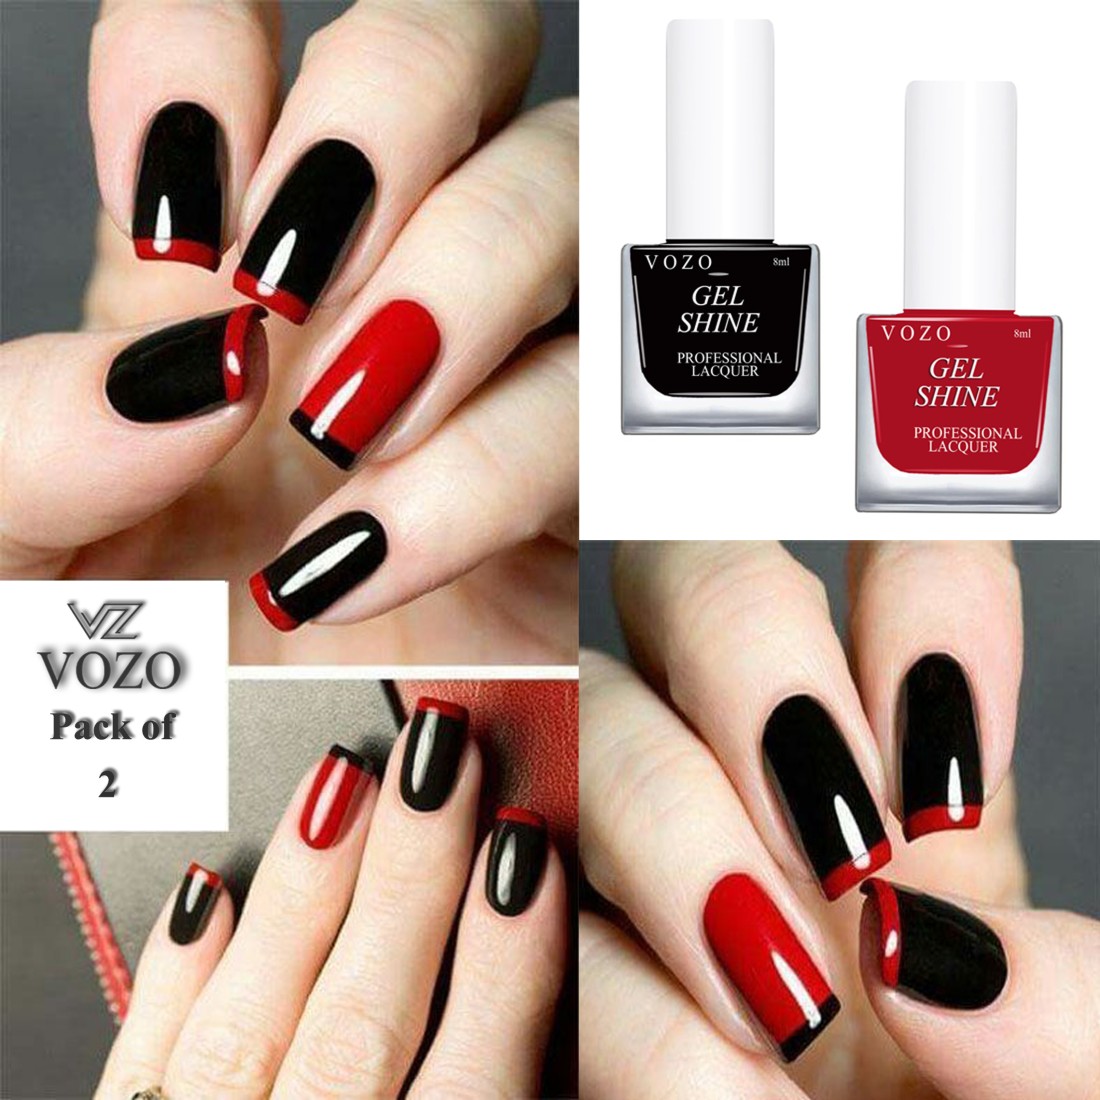 Nails Qatar - This color combination and design is... | Facebook